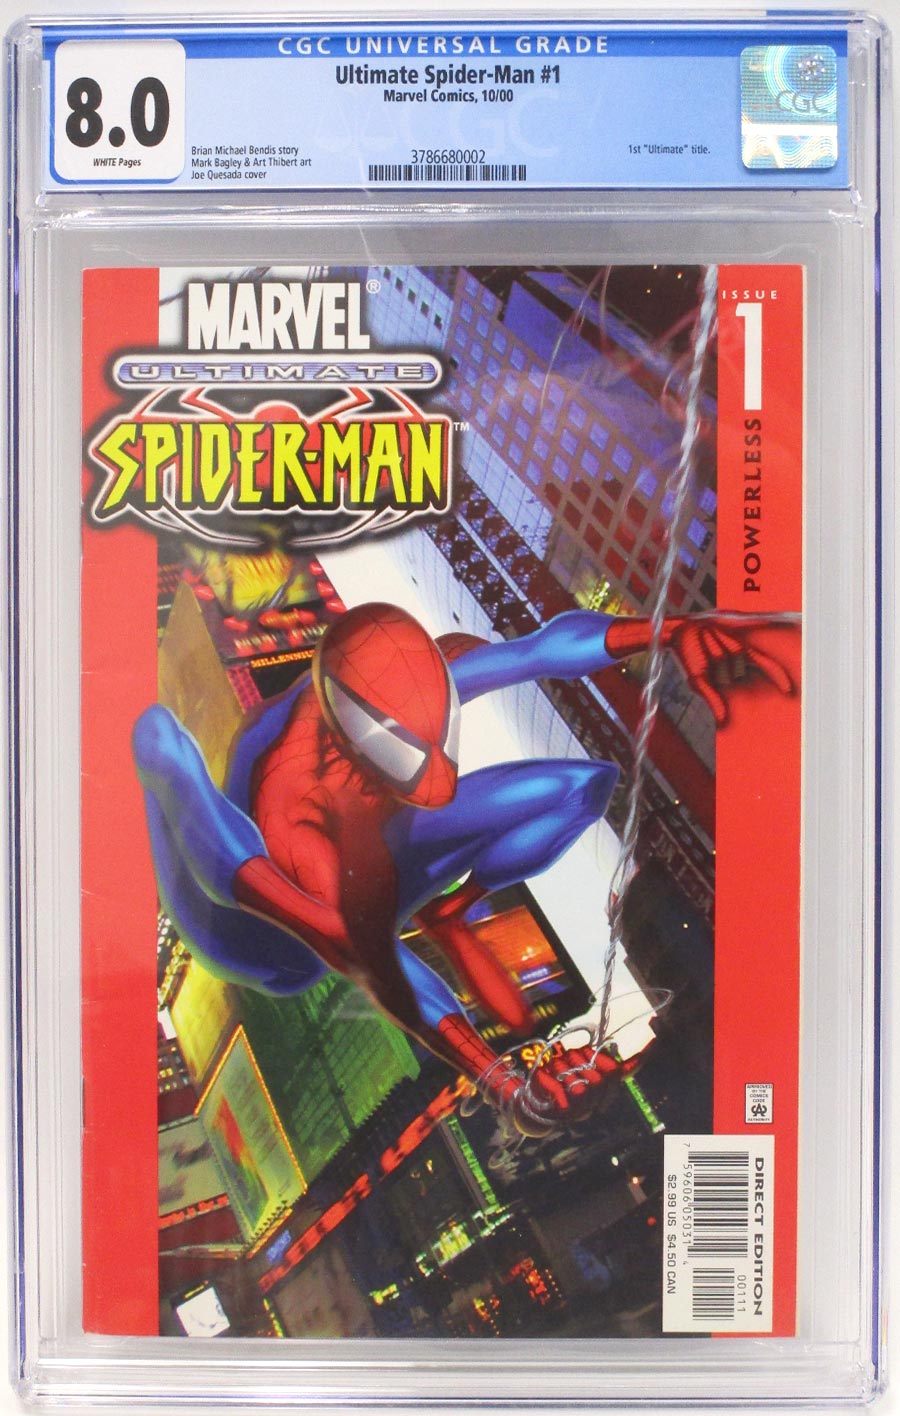 Ultimate Spider-Man #1 Cover I Regular Cover CGC 8.0